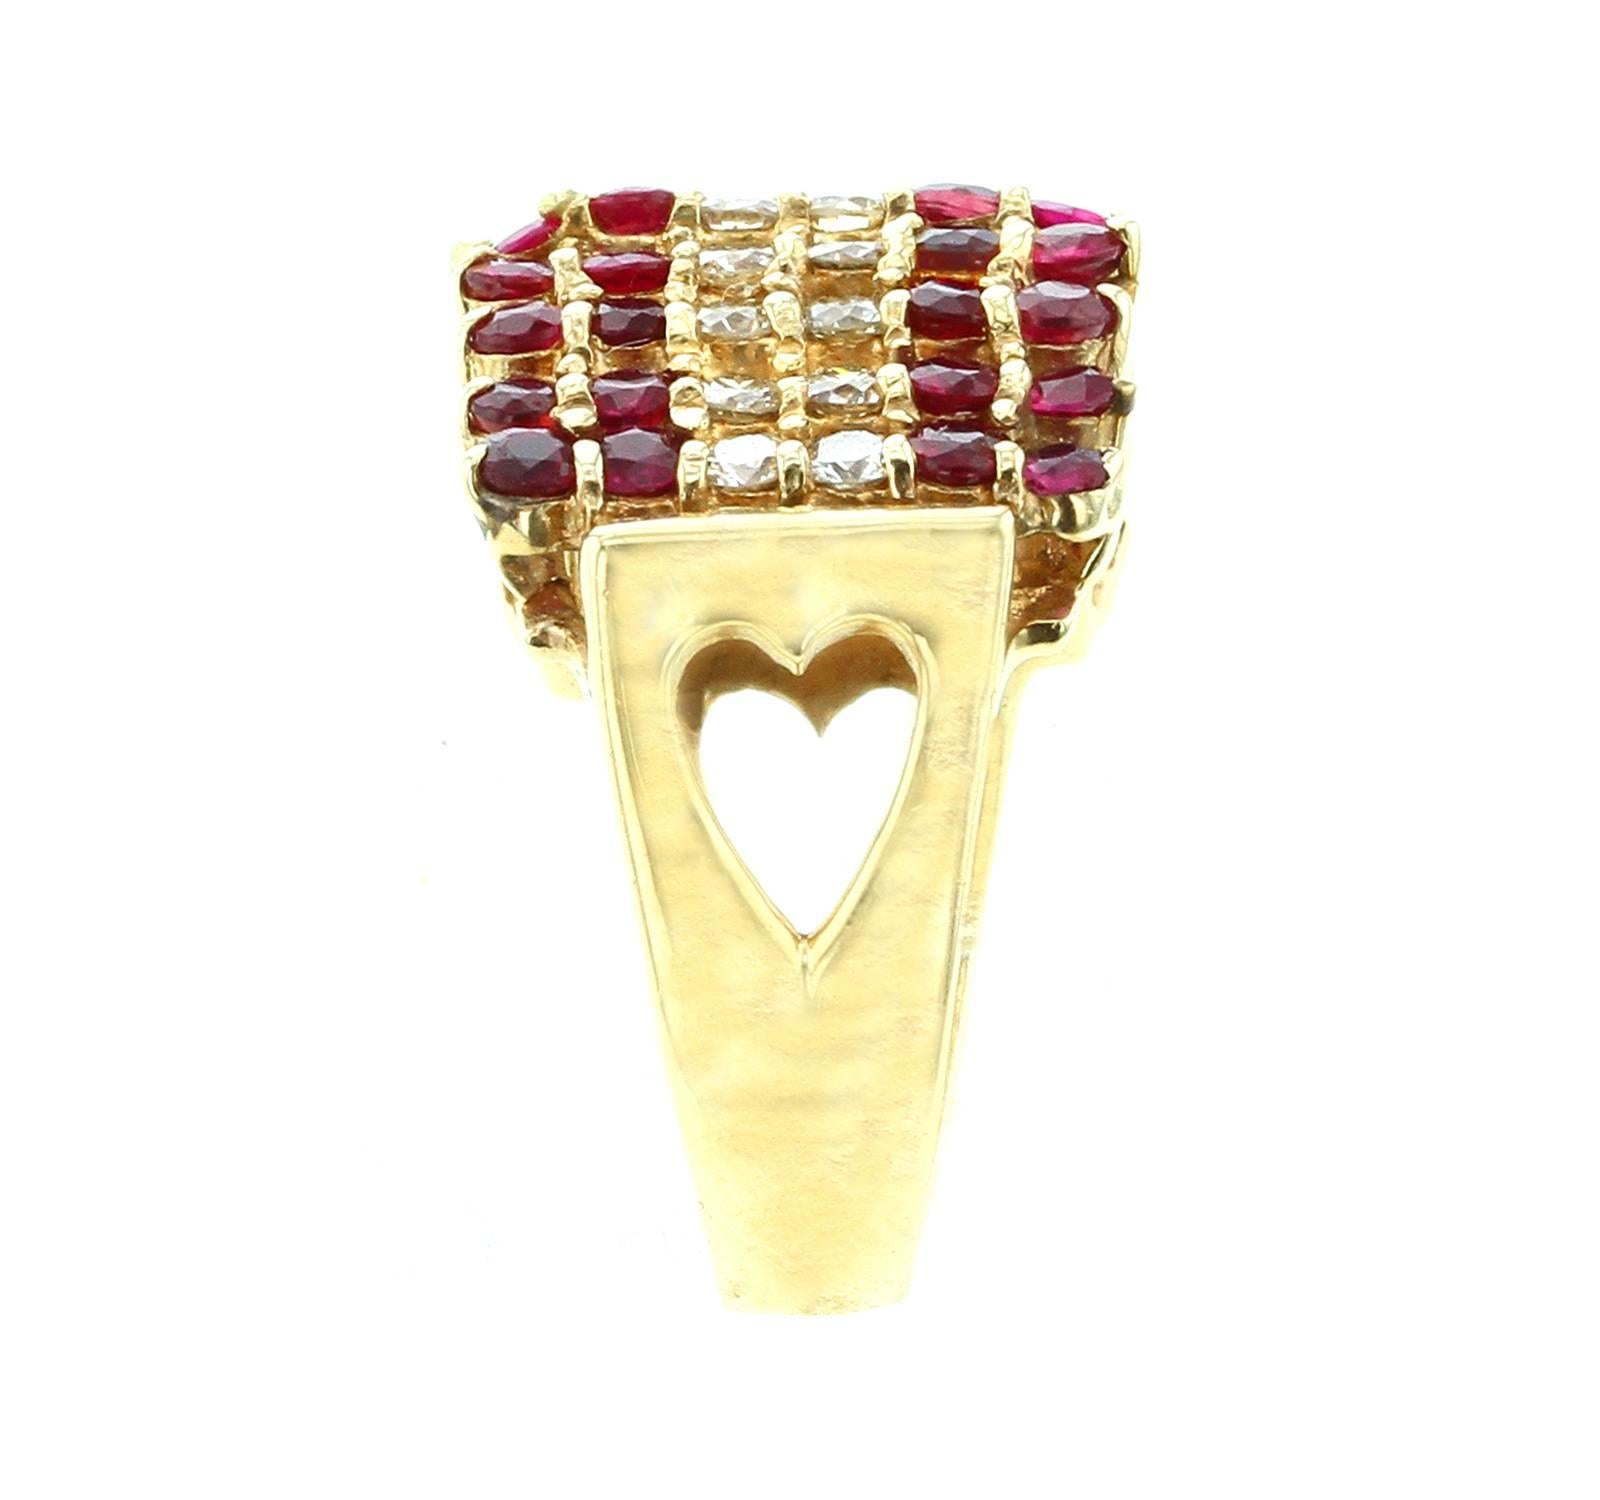 A curved and elevated triangular ring with two rows of diamonds accented with two rows of rubies on each side with a total width of 1